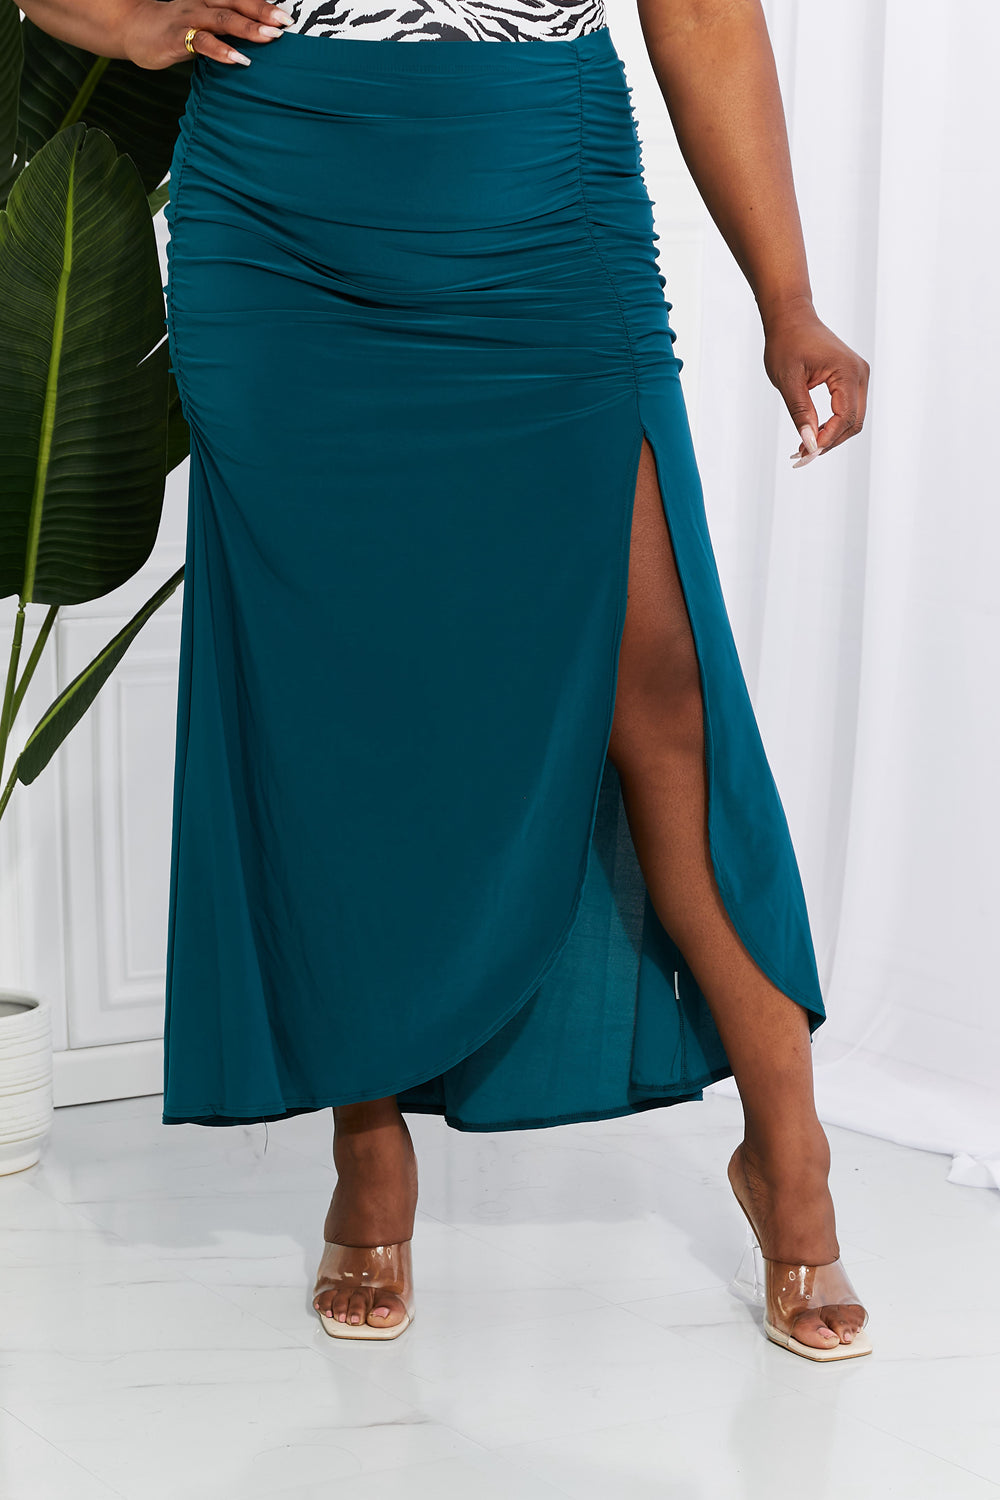 Full Size Up and Up Ruched Slit Maxi Skirt in Teal - Bottoms - Skirts - 6 - 2024